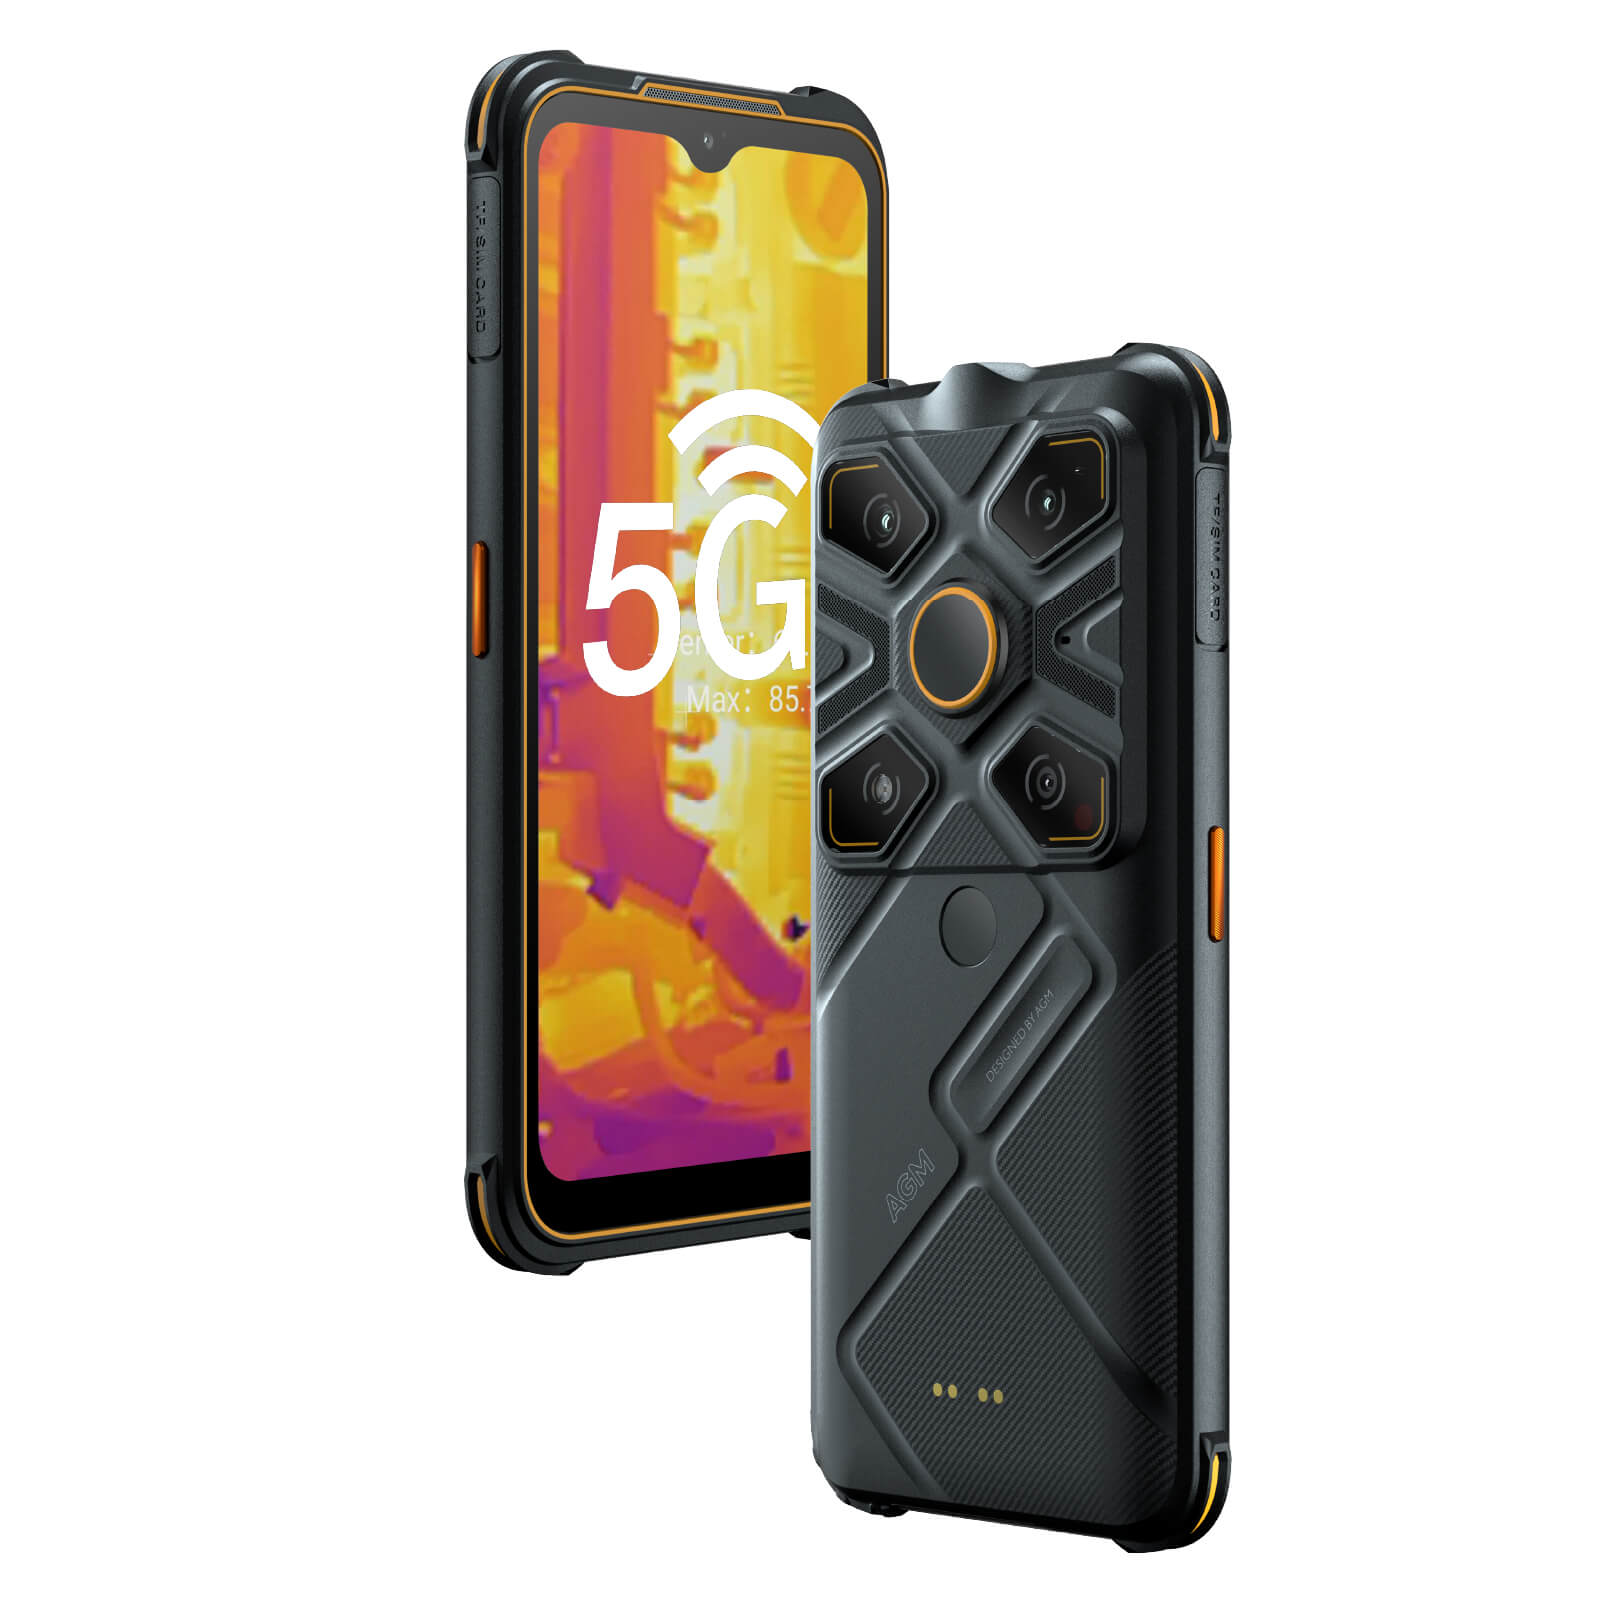 AGM Glory G1S | Top Thermal Camera Resolution: 256 x 192 Frame Rate: 25 FPS | 5G Qualcomm Rugged Smartphone